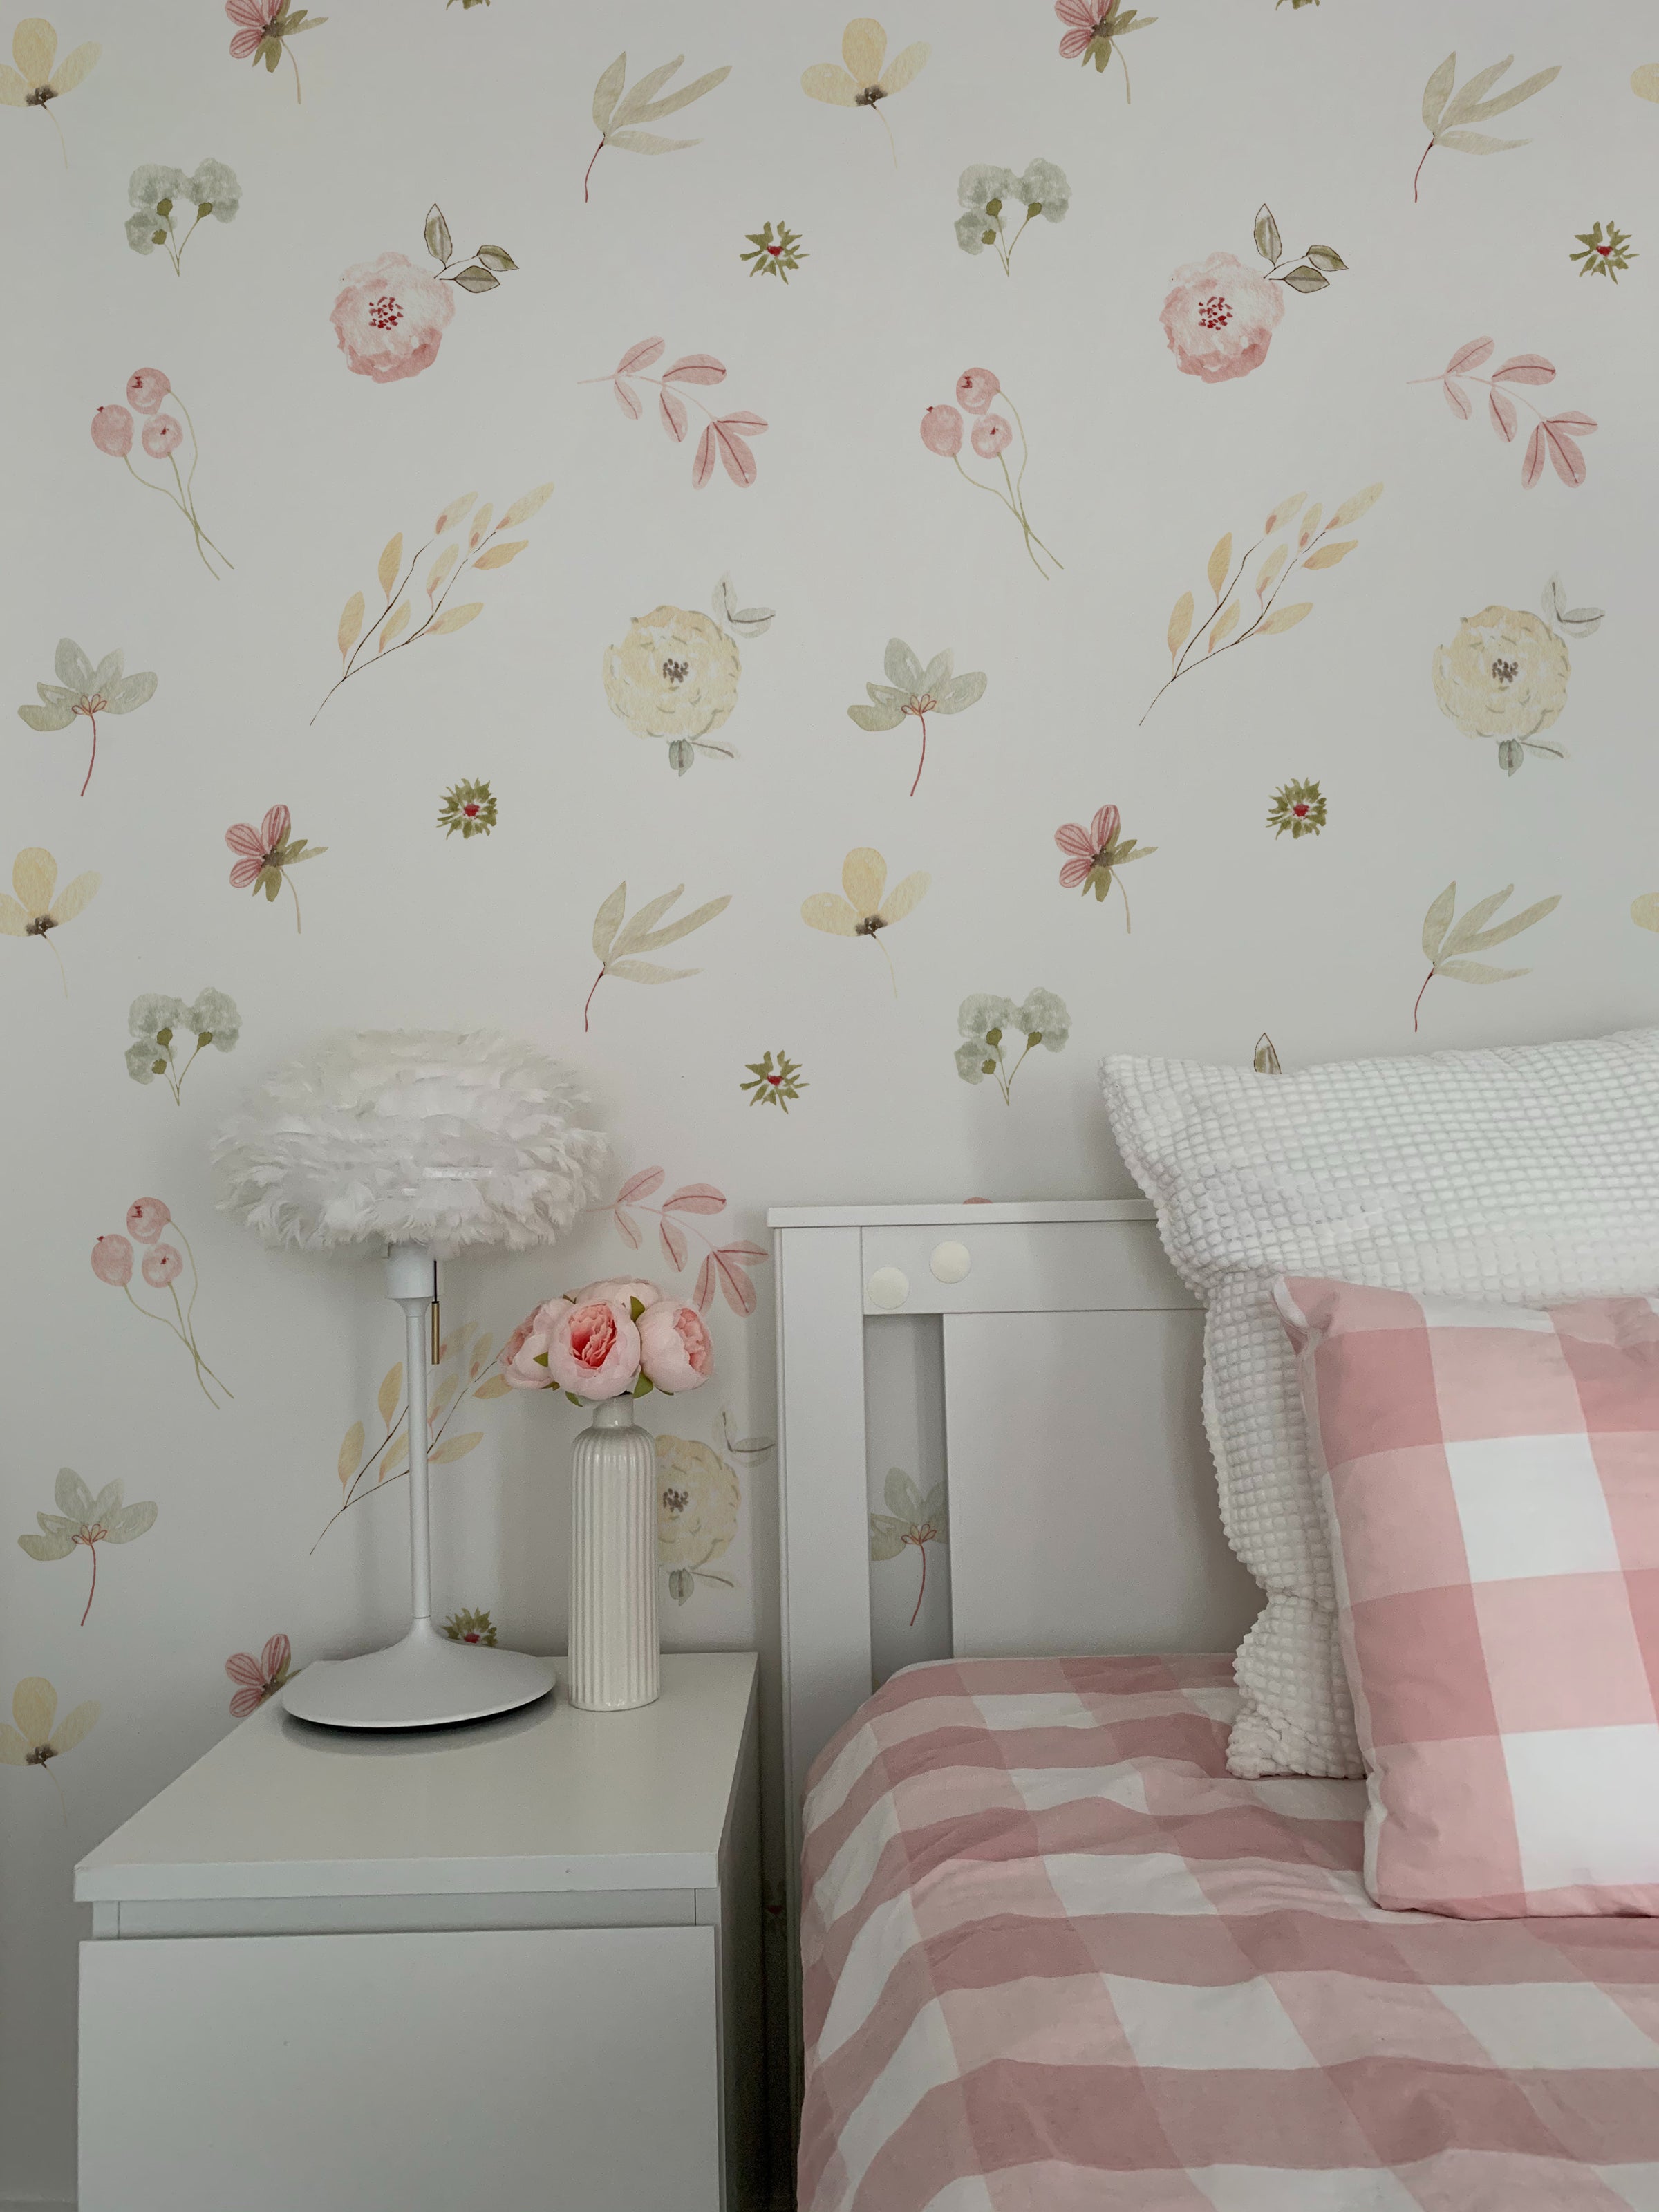 A charming bedroom setup highlights the Pink Watercolour Floral Wallpaper as a beautiful accent. The floral design creates a soothing atmosphere, paired with a cozy bed with pink and white bedding, a feathered lampshade, and a simple white nightstand adorned with fresh flowers for a touch of elegance.